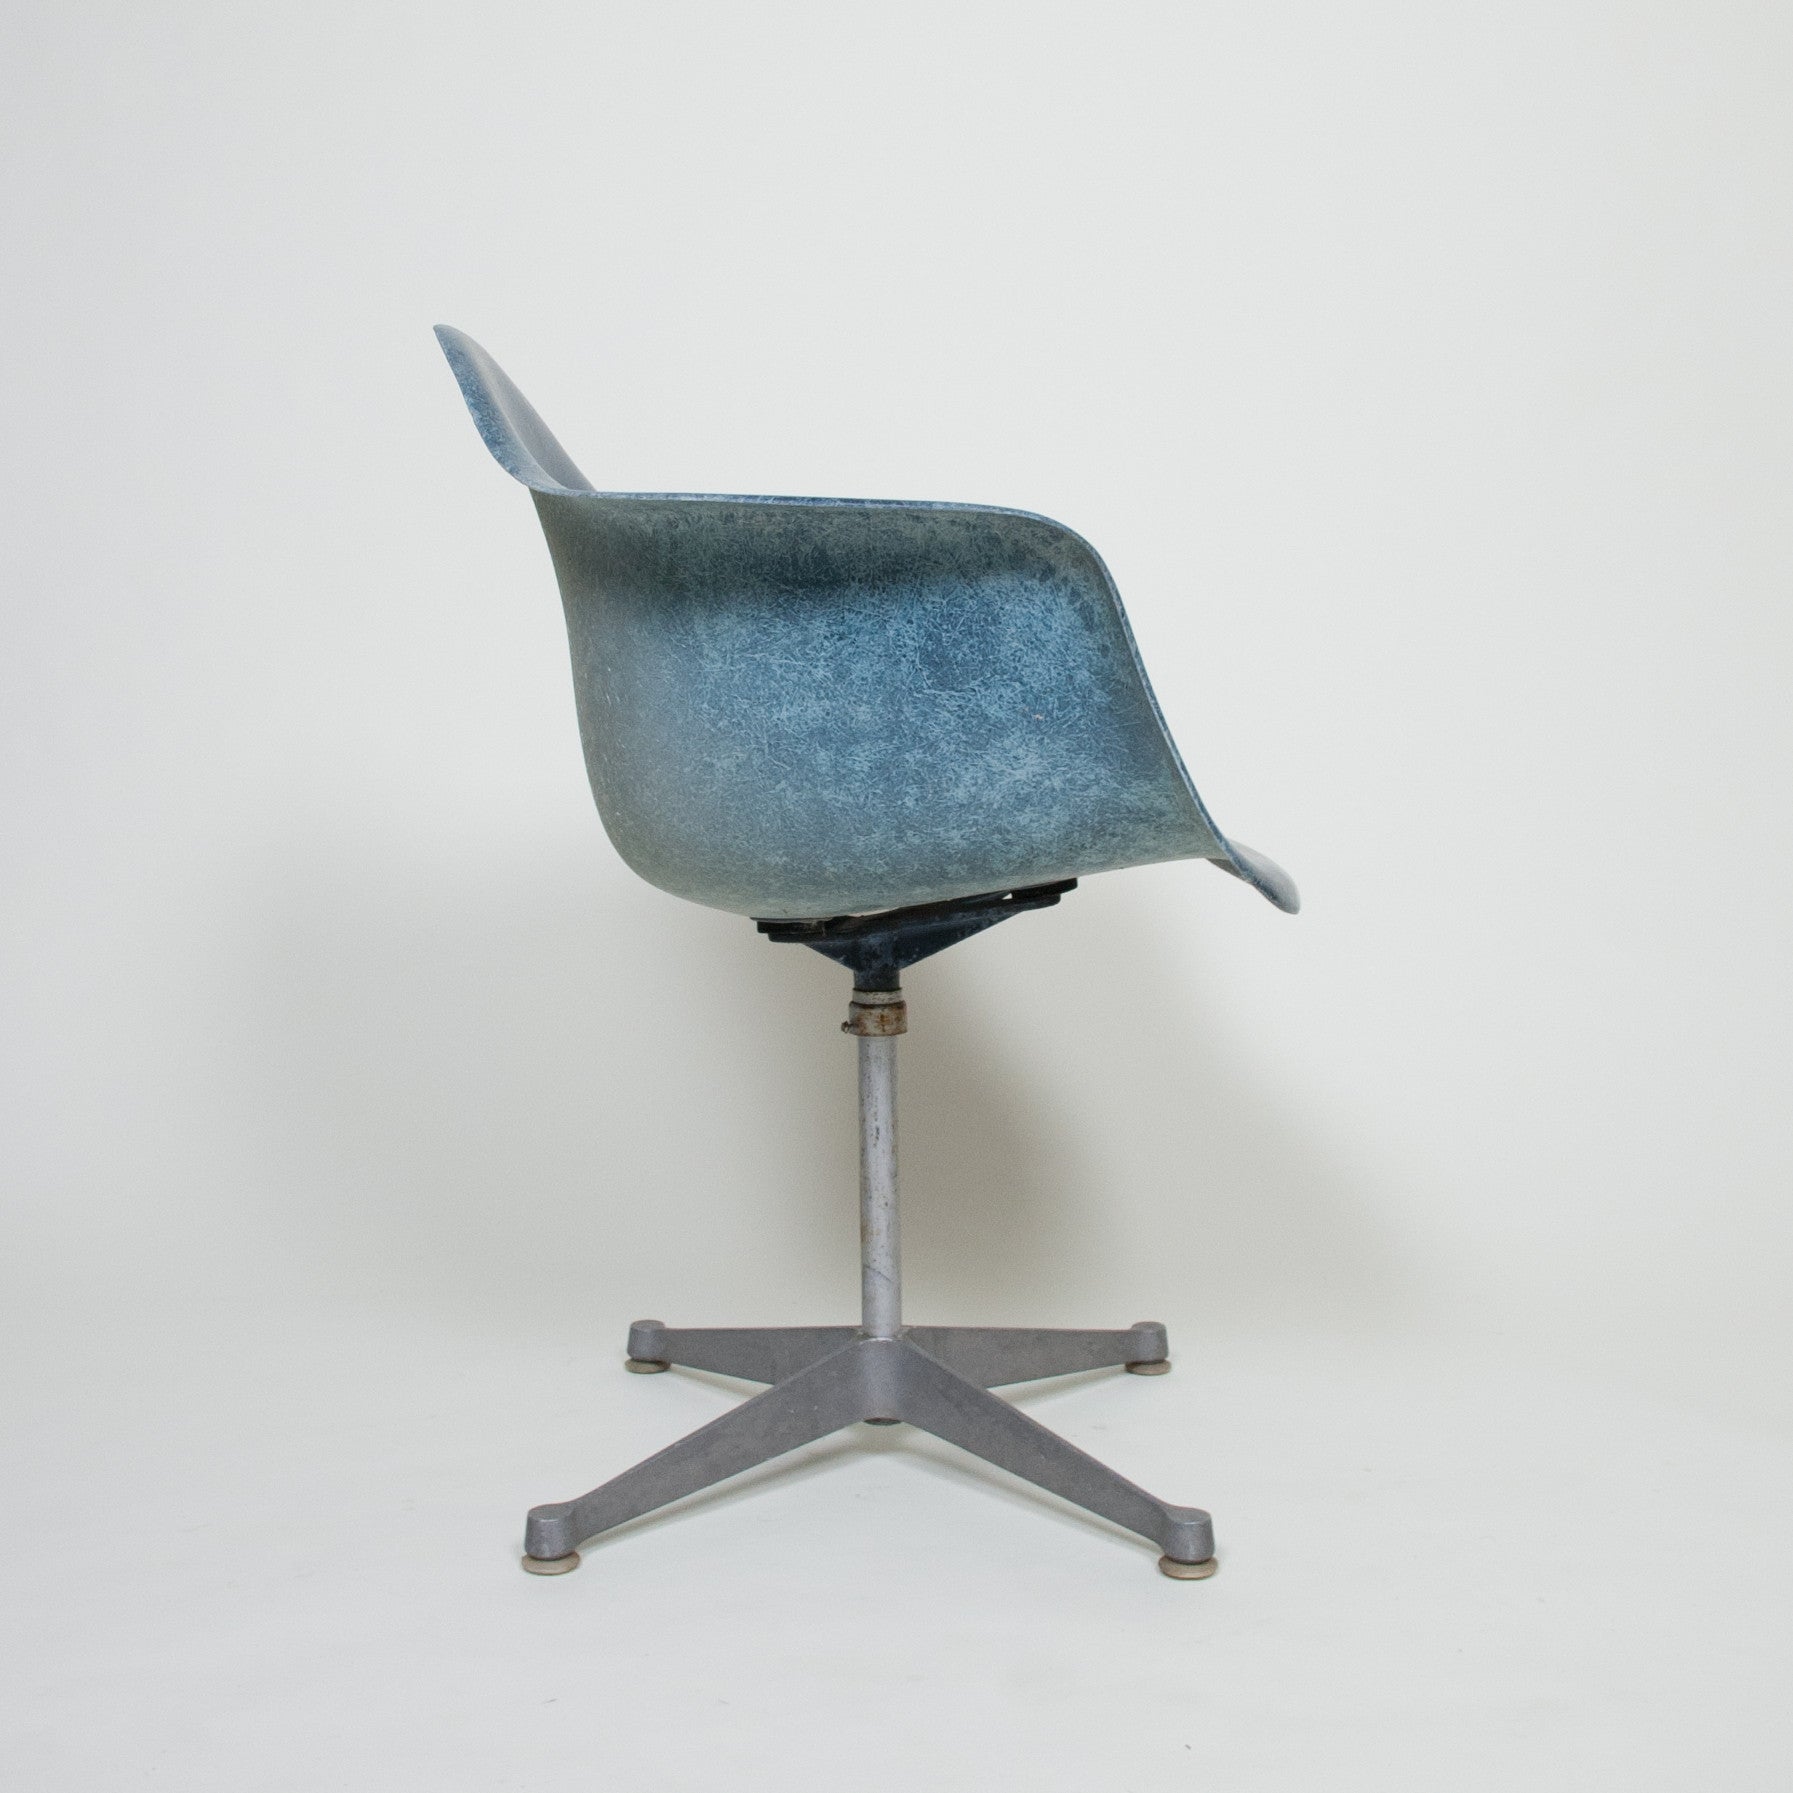 SOLD Rare Vintage Herman Miller Eames Navy Blue Fiberglass Armshell Chairs 5 Available